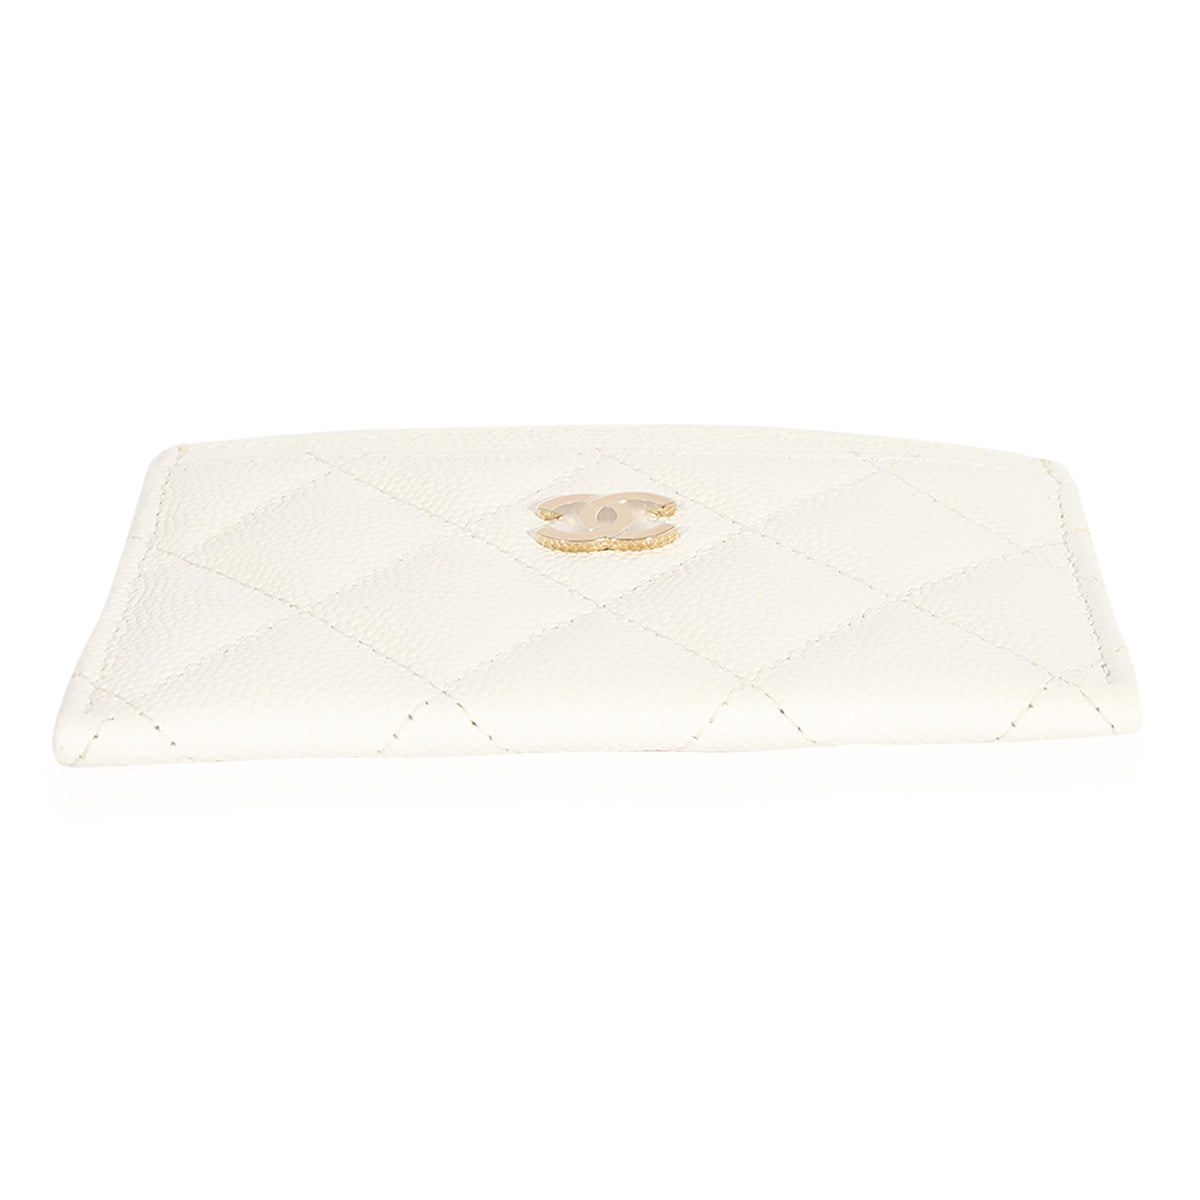 Chanel White Quilted Caviar Classic Card Holder, myGemma